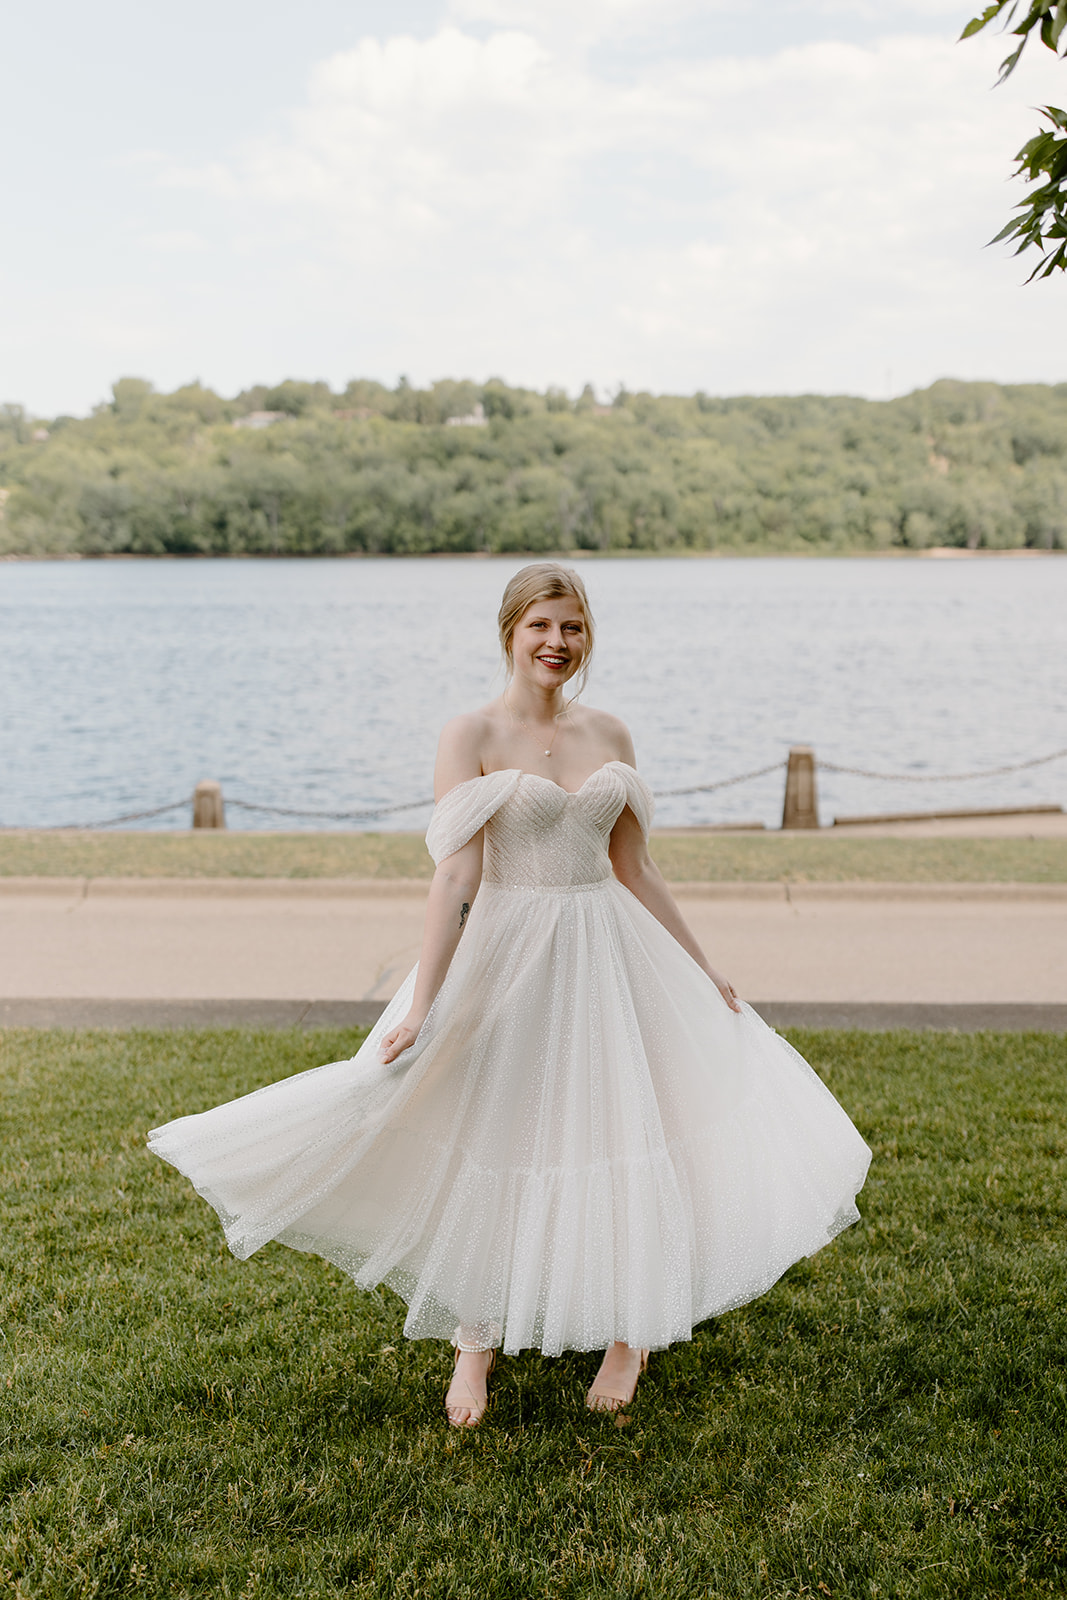 Bride twirling her dress in front of a lift bridge on the St. Croix river